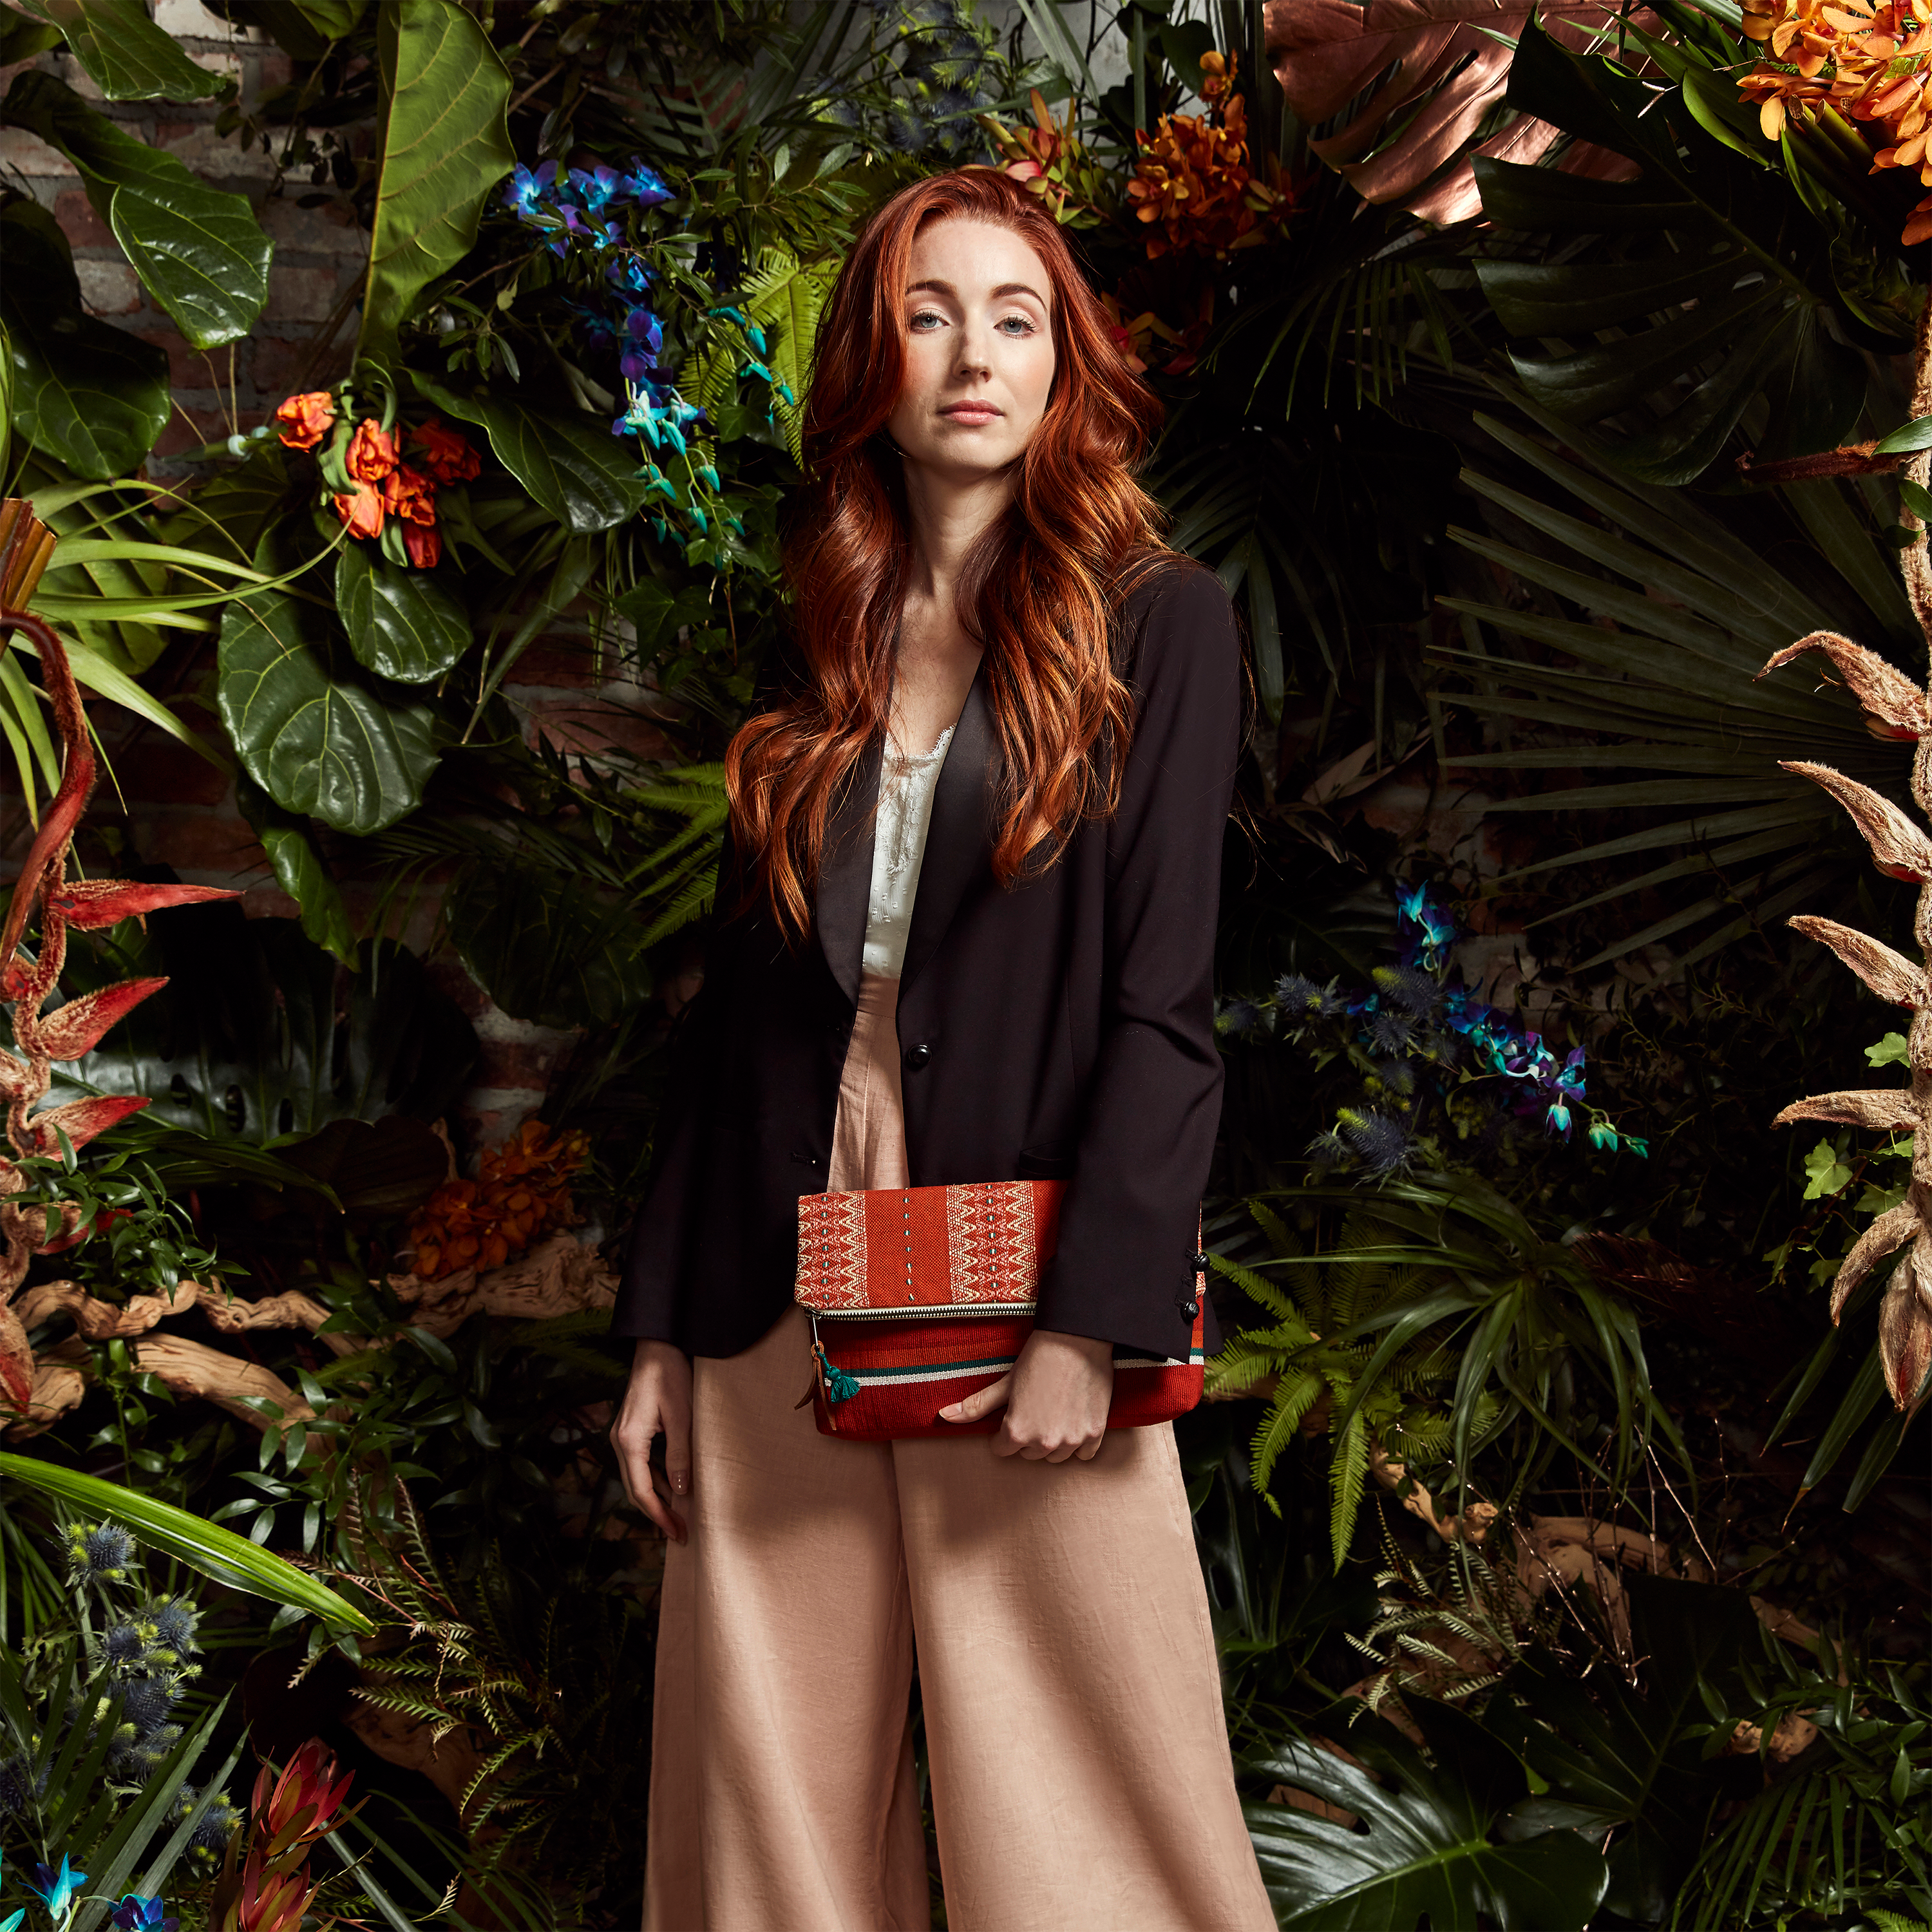 A model stands in front of tropical plants and looks at the camera. She holds the hand woven artisan Celia Clutch in Ginger pattern in one hand.